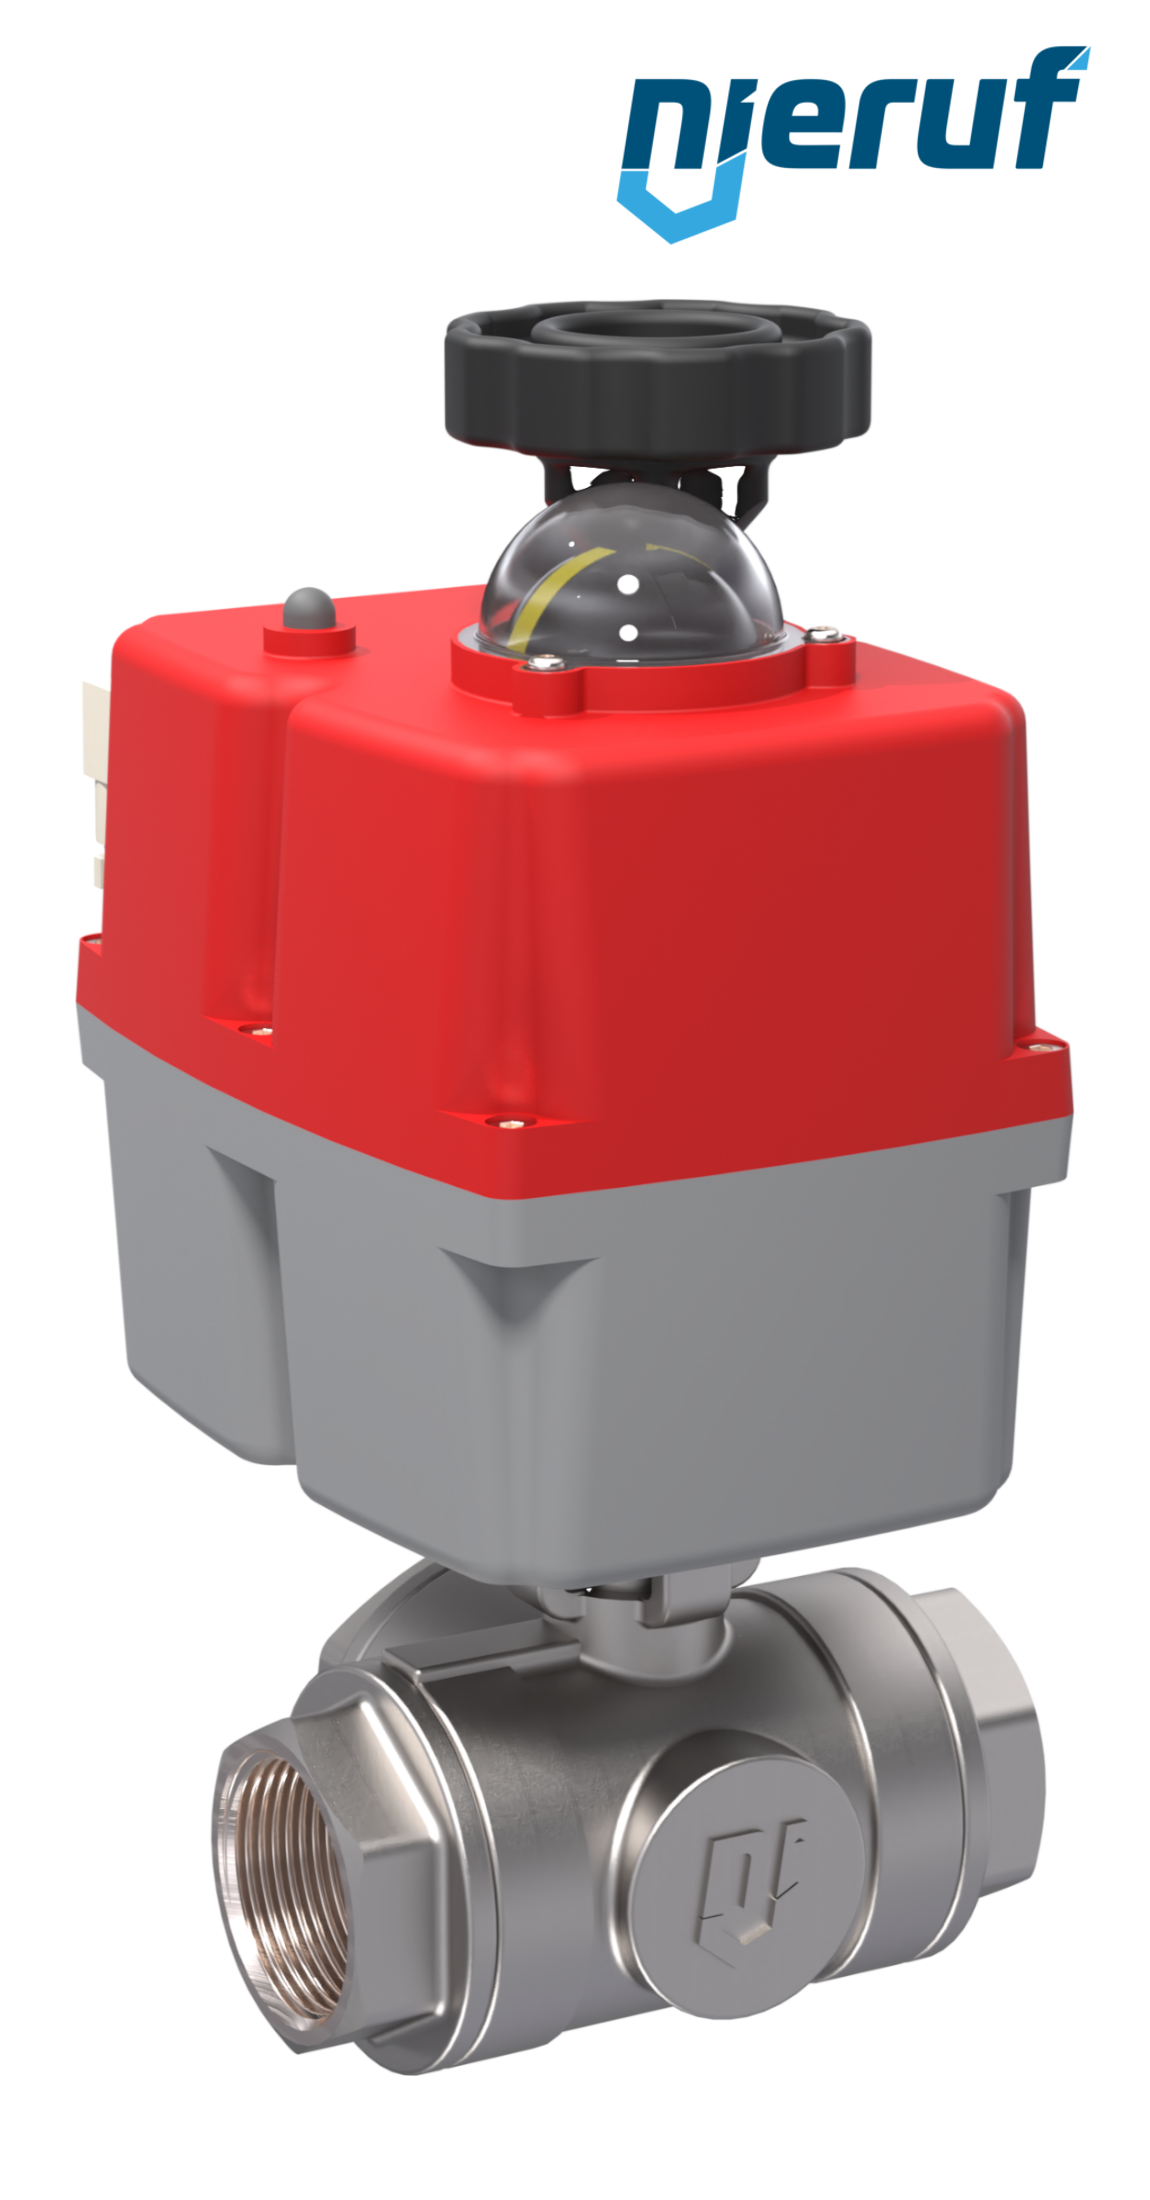 3 way automatic-ball valve 24-240V DN40 - 1 1/2" inch stainless steel reduced port design with L drilling